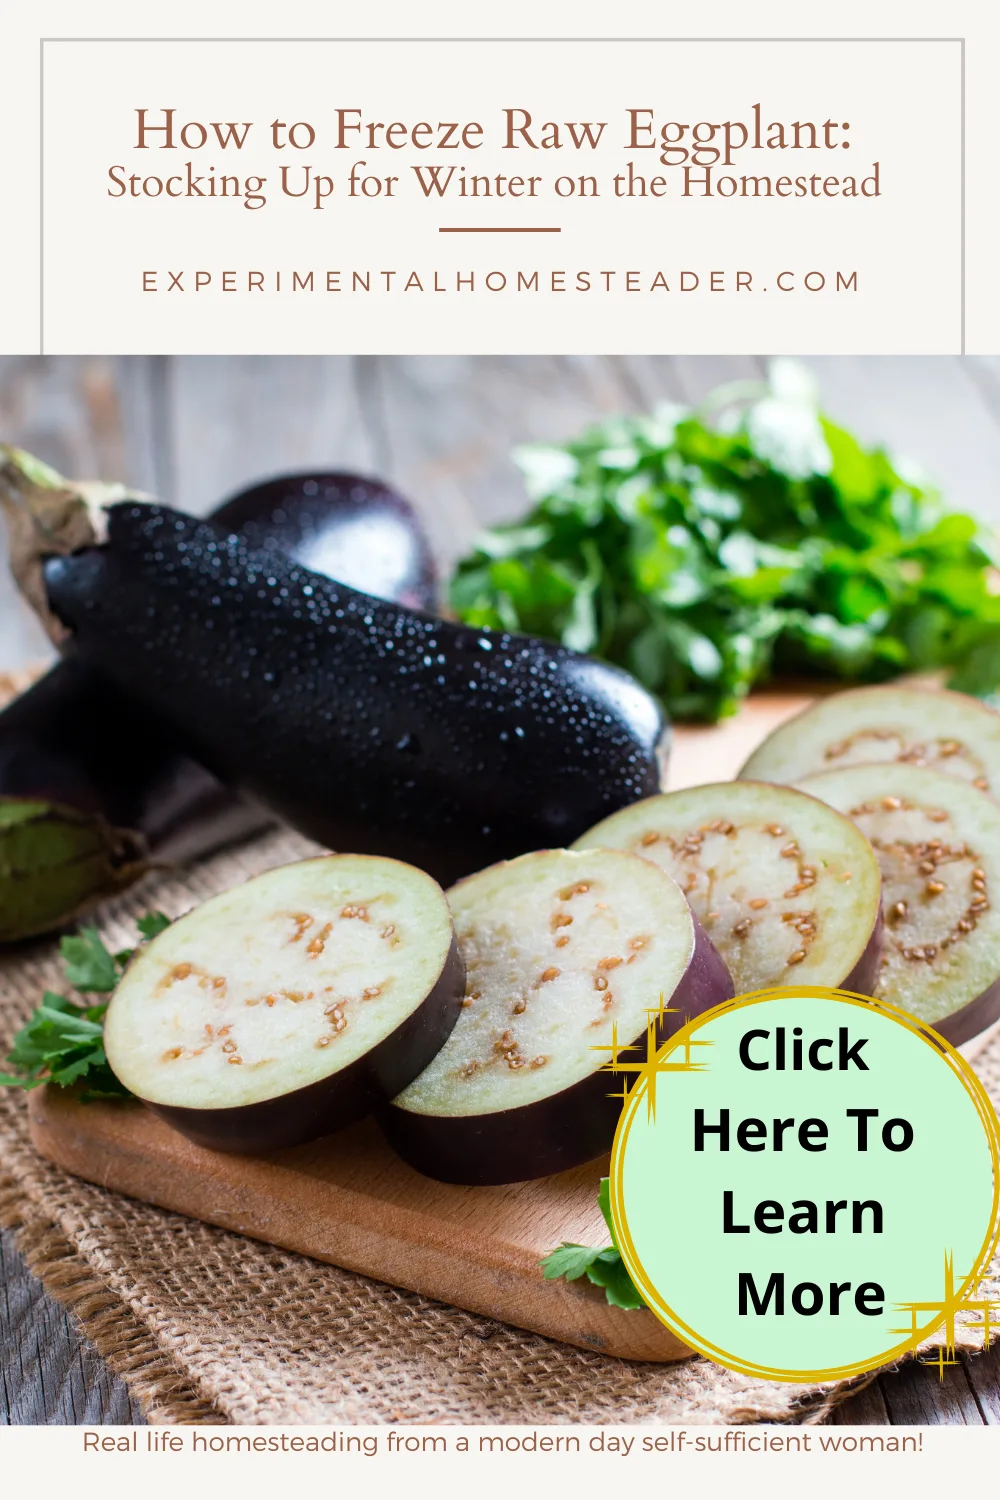 A whole eggplant in the background with eggplant slices on a cutting board in front.